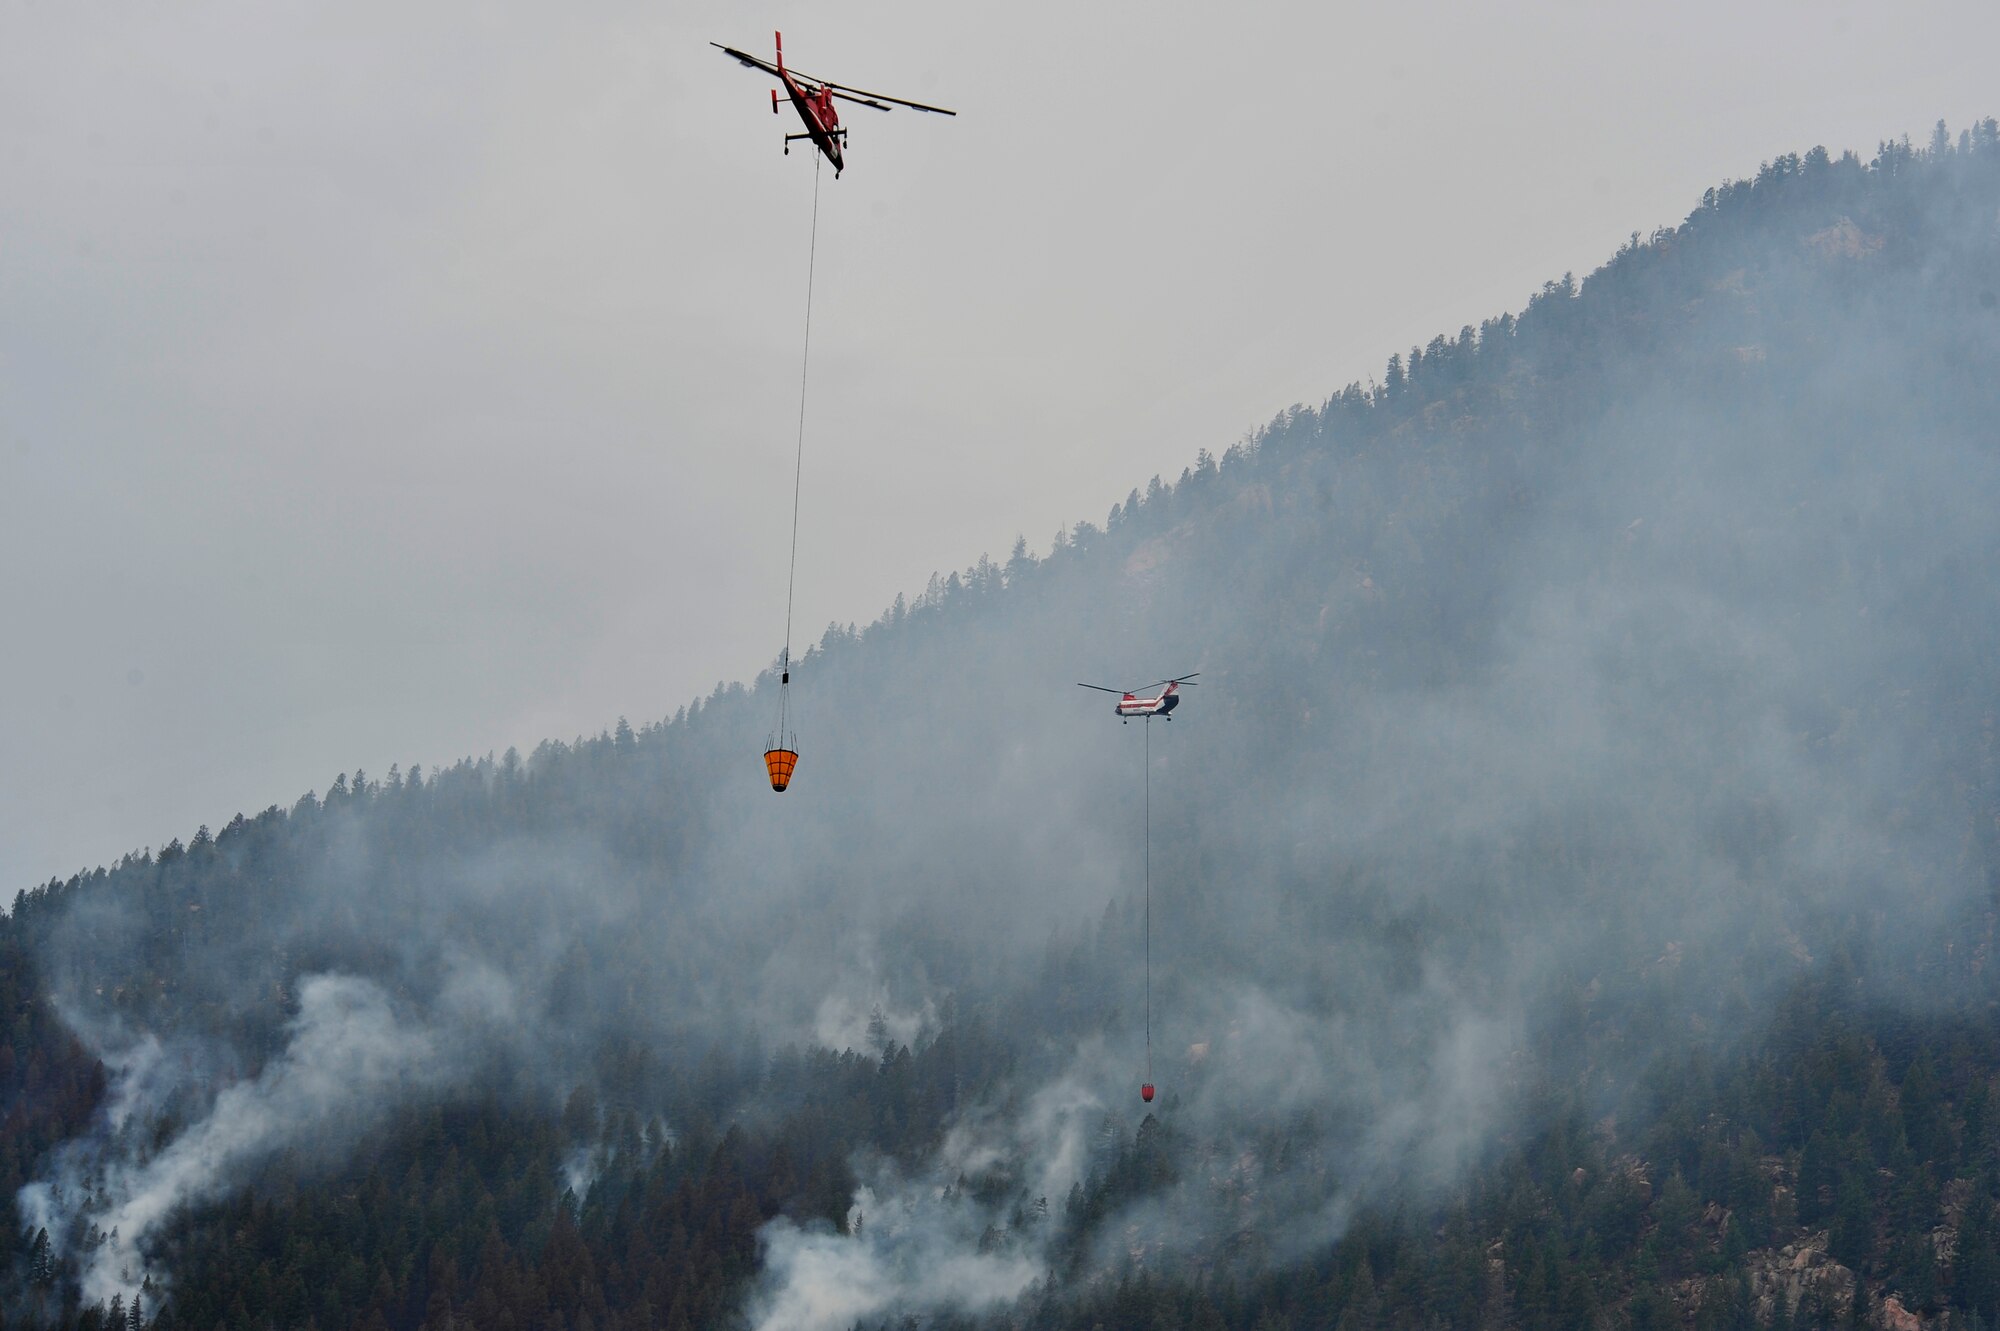 Helicopters dump water on the Waldo Canyon Fire that has spread to the outskirts of the Air Force Academy, Colo., June 28. The Waldo Canyon fire has destroyed over 18,000 acres in the Colorado Springs area. (U.S. Air Force photo by Staff Sgt. Christopher Boitz)